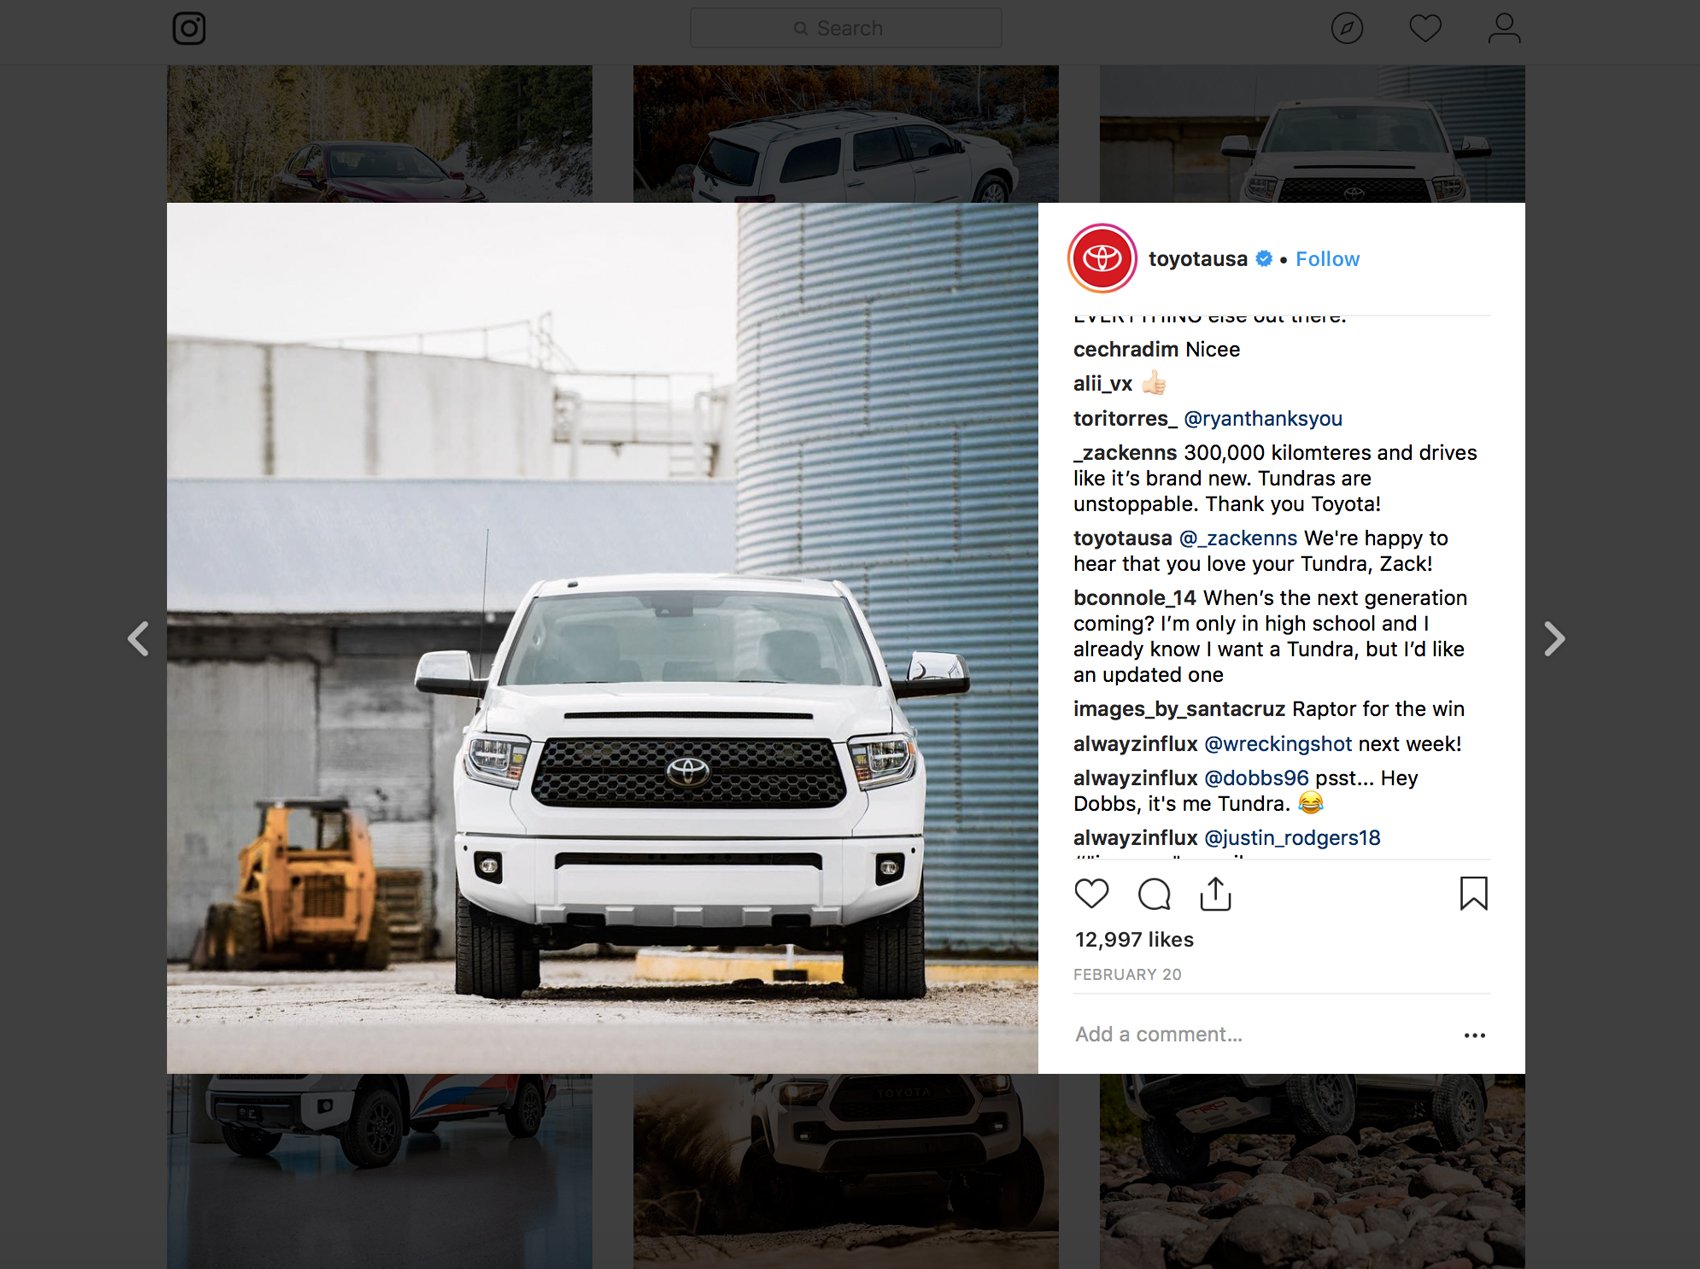 Photo by Mark Skovorodko for Toyota of a Toyota Tundra as featured on Toyota's Instagram profile.